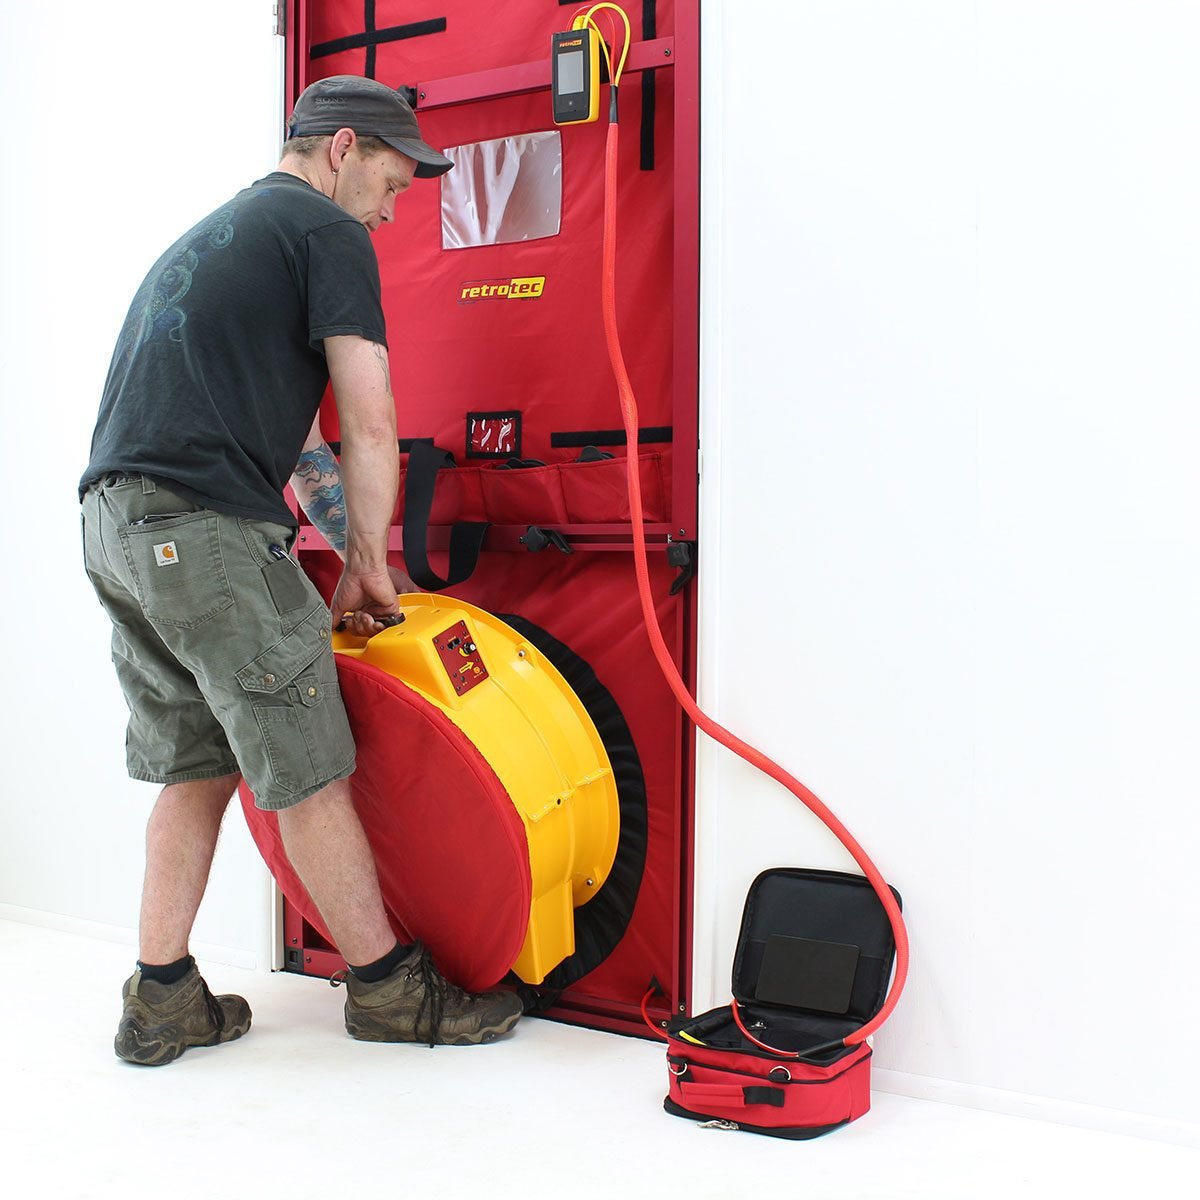 What Is a Blower Door Test?